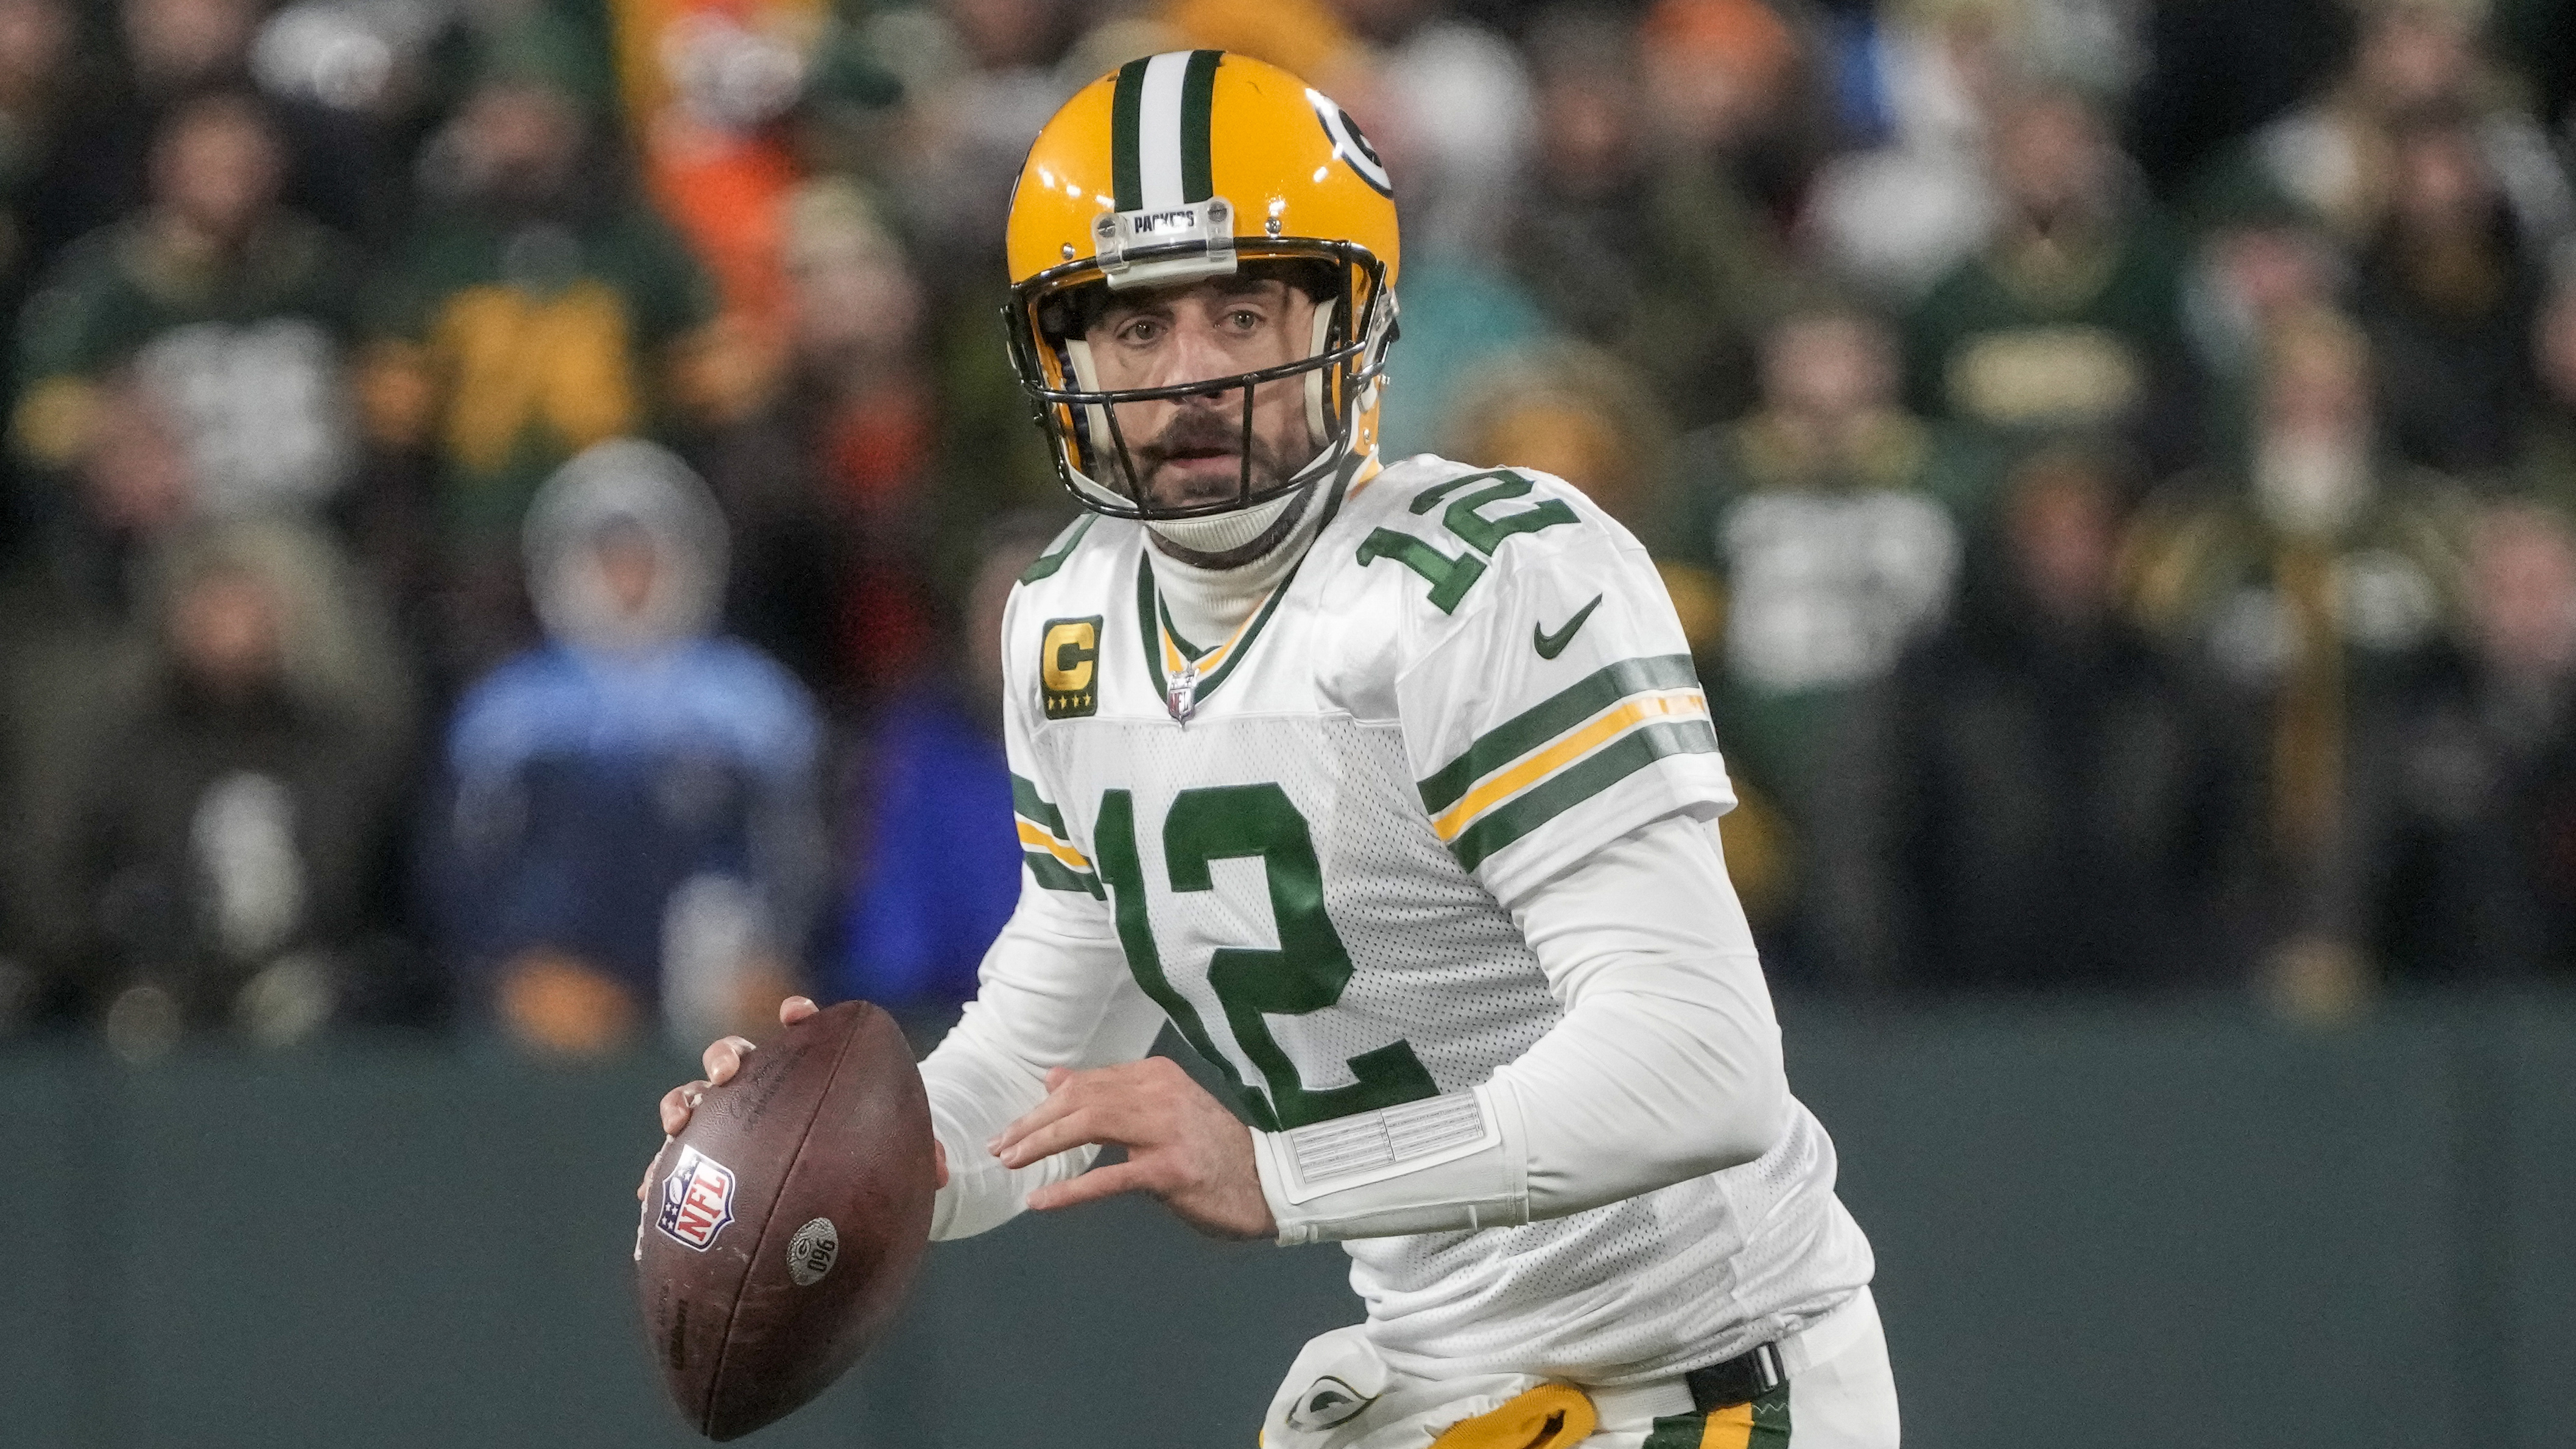 Packers vs. Eagles prediction: Green Bay game plan may affect the total